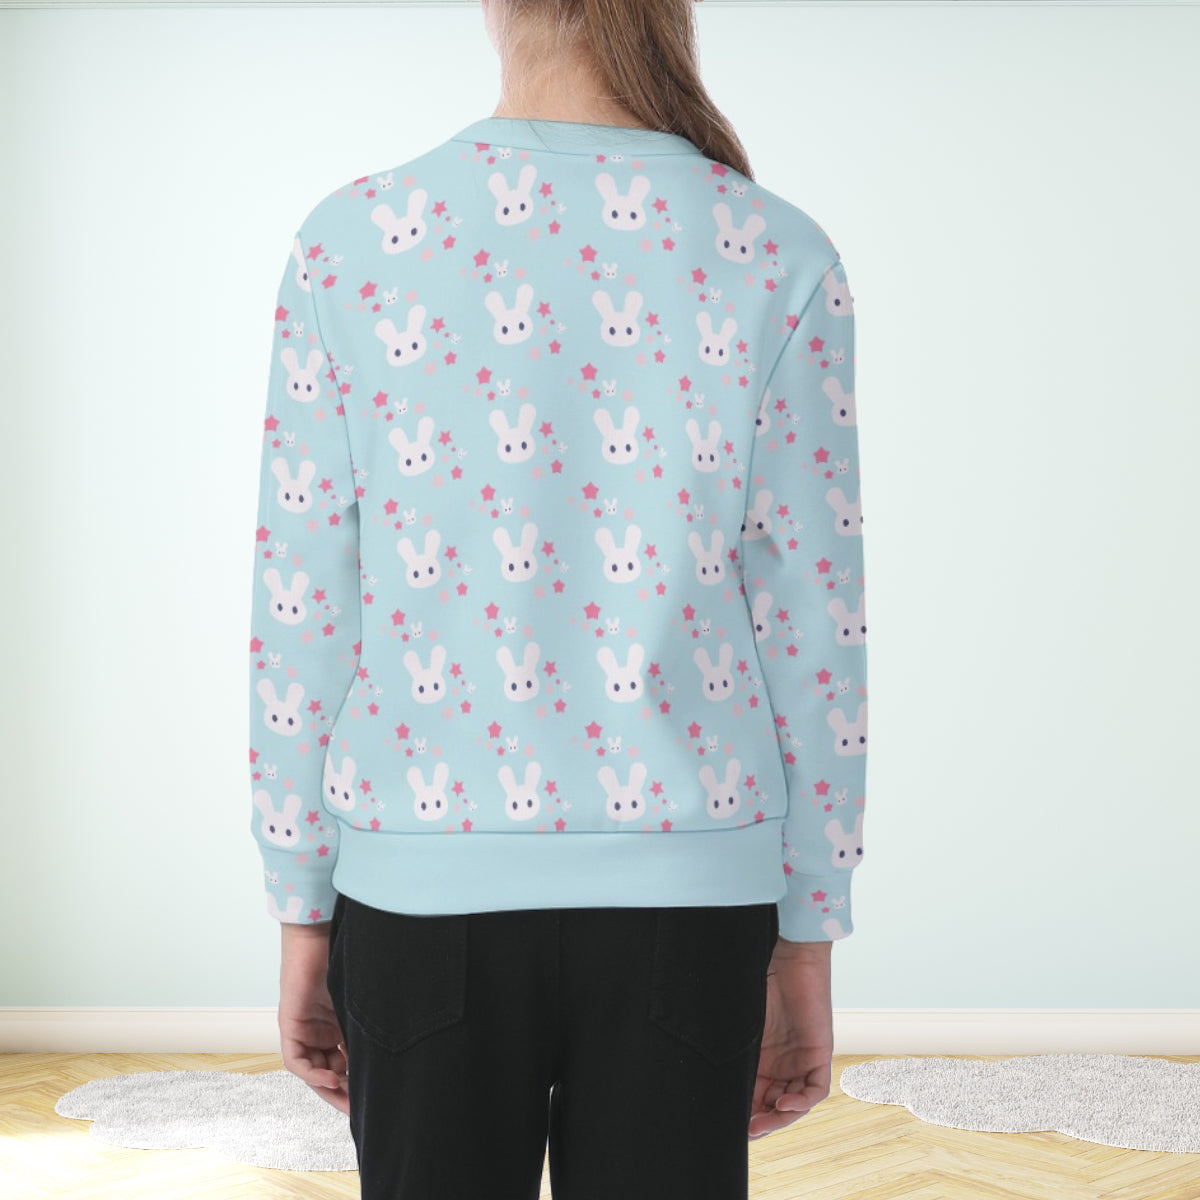 Kawaii Cute Rabbit and Stars Pattern Kids Sweater-4 Colors Available